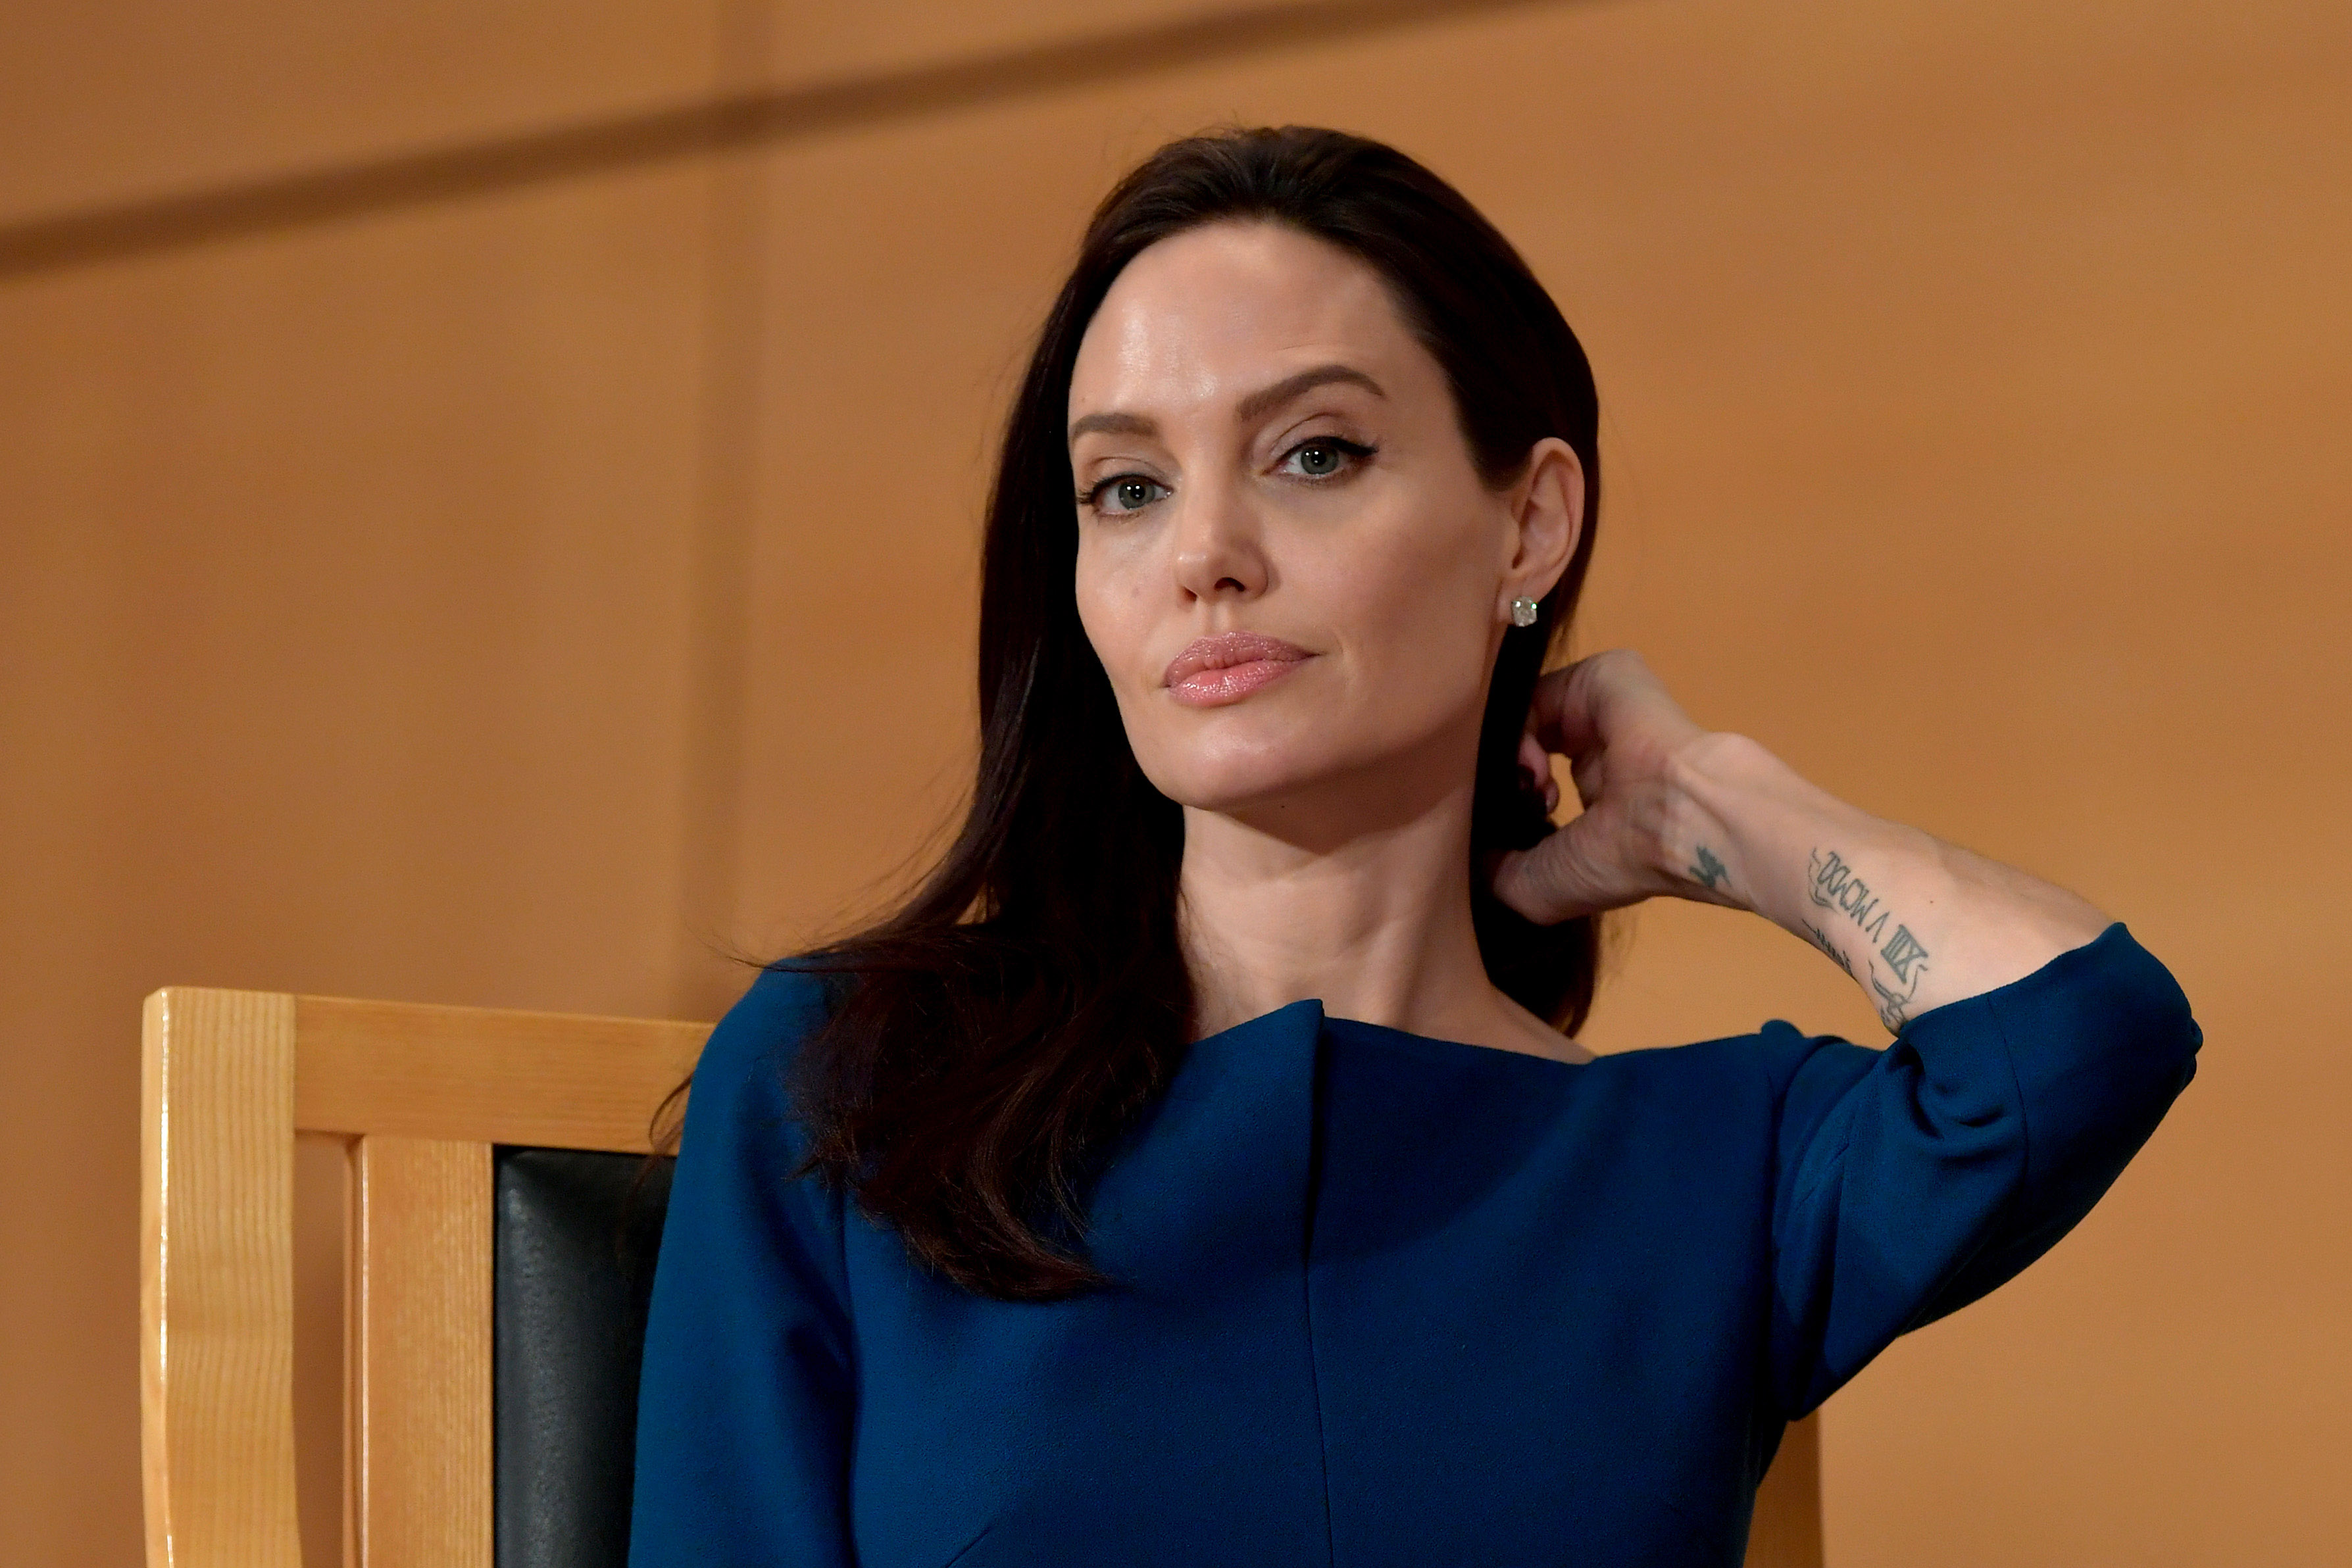 Angelina Jolie Already Talking Marriage With New Man — "The News Caught